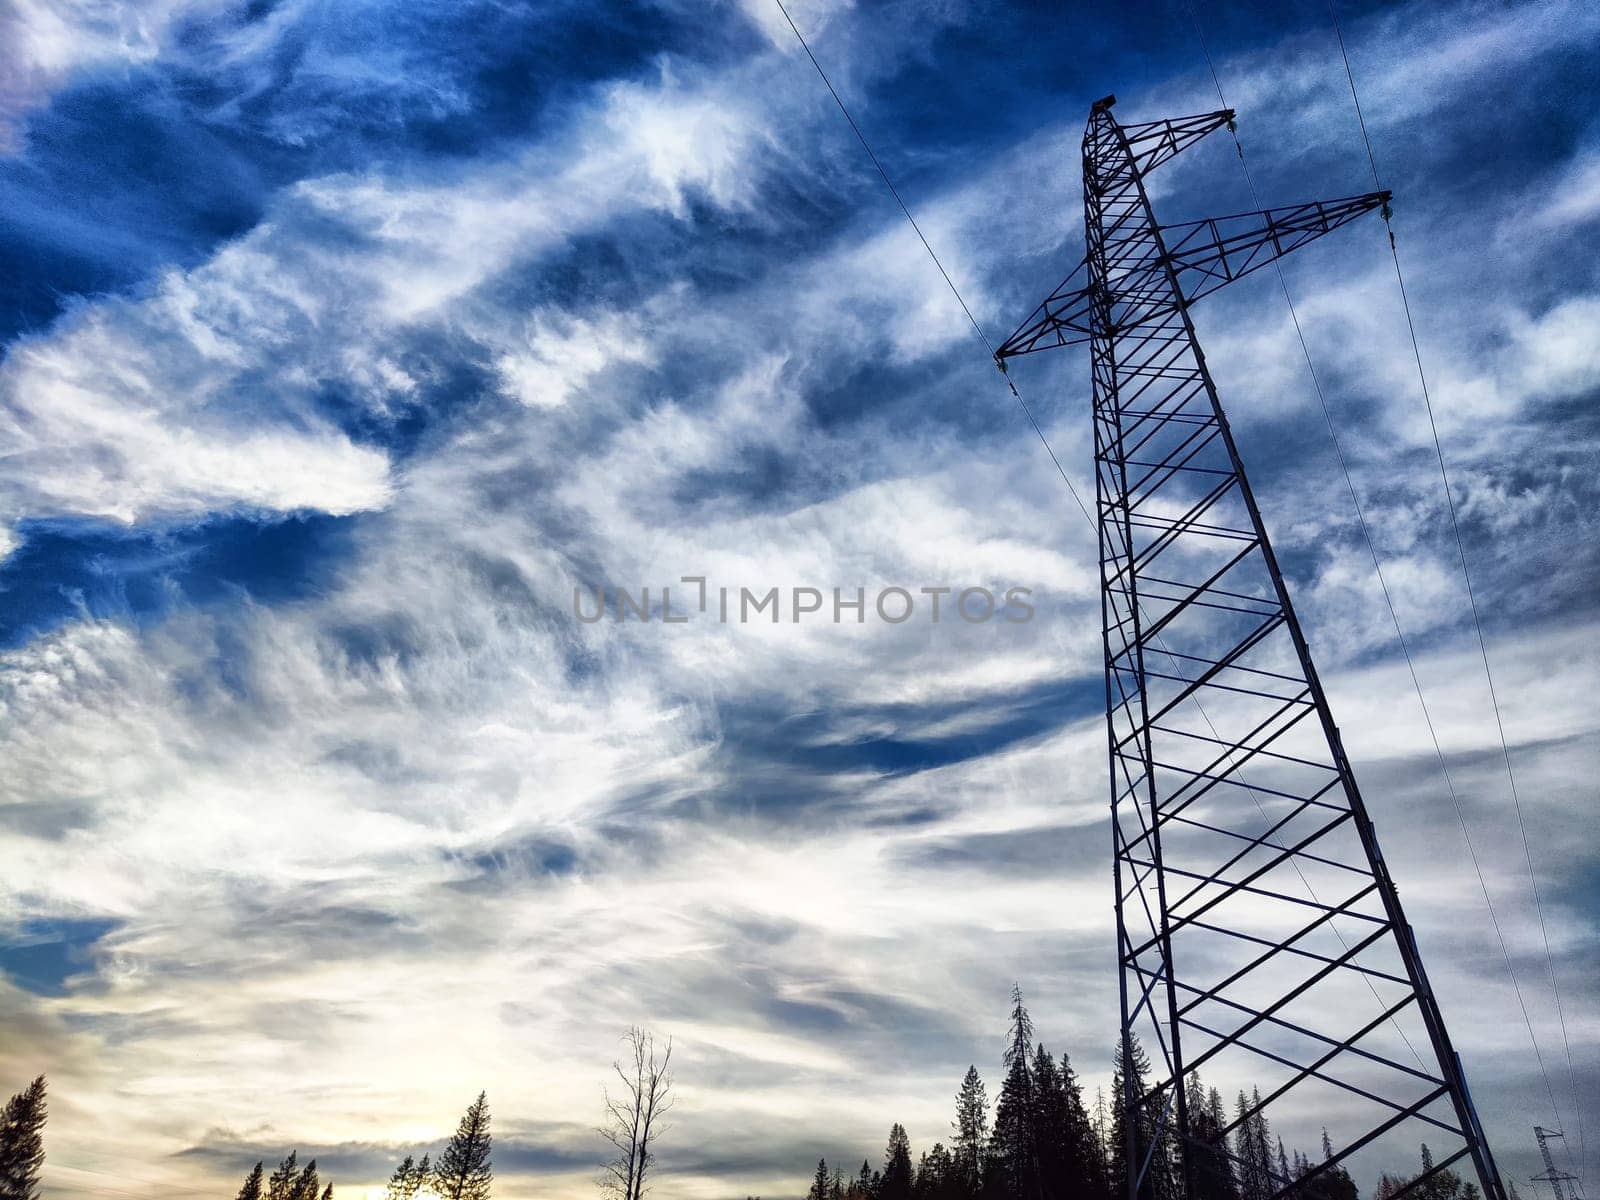 Power lines on a hill, hill or in the mountains against a blue sky with white clouds. Electric lines, towers, wires in the landscape by keleny